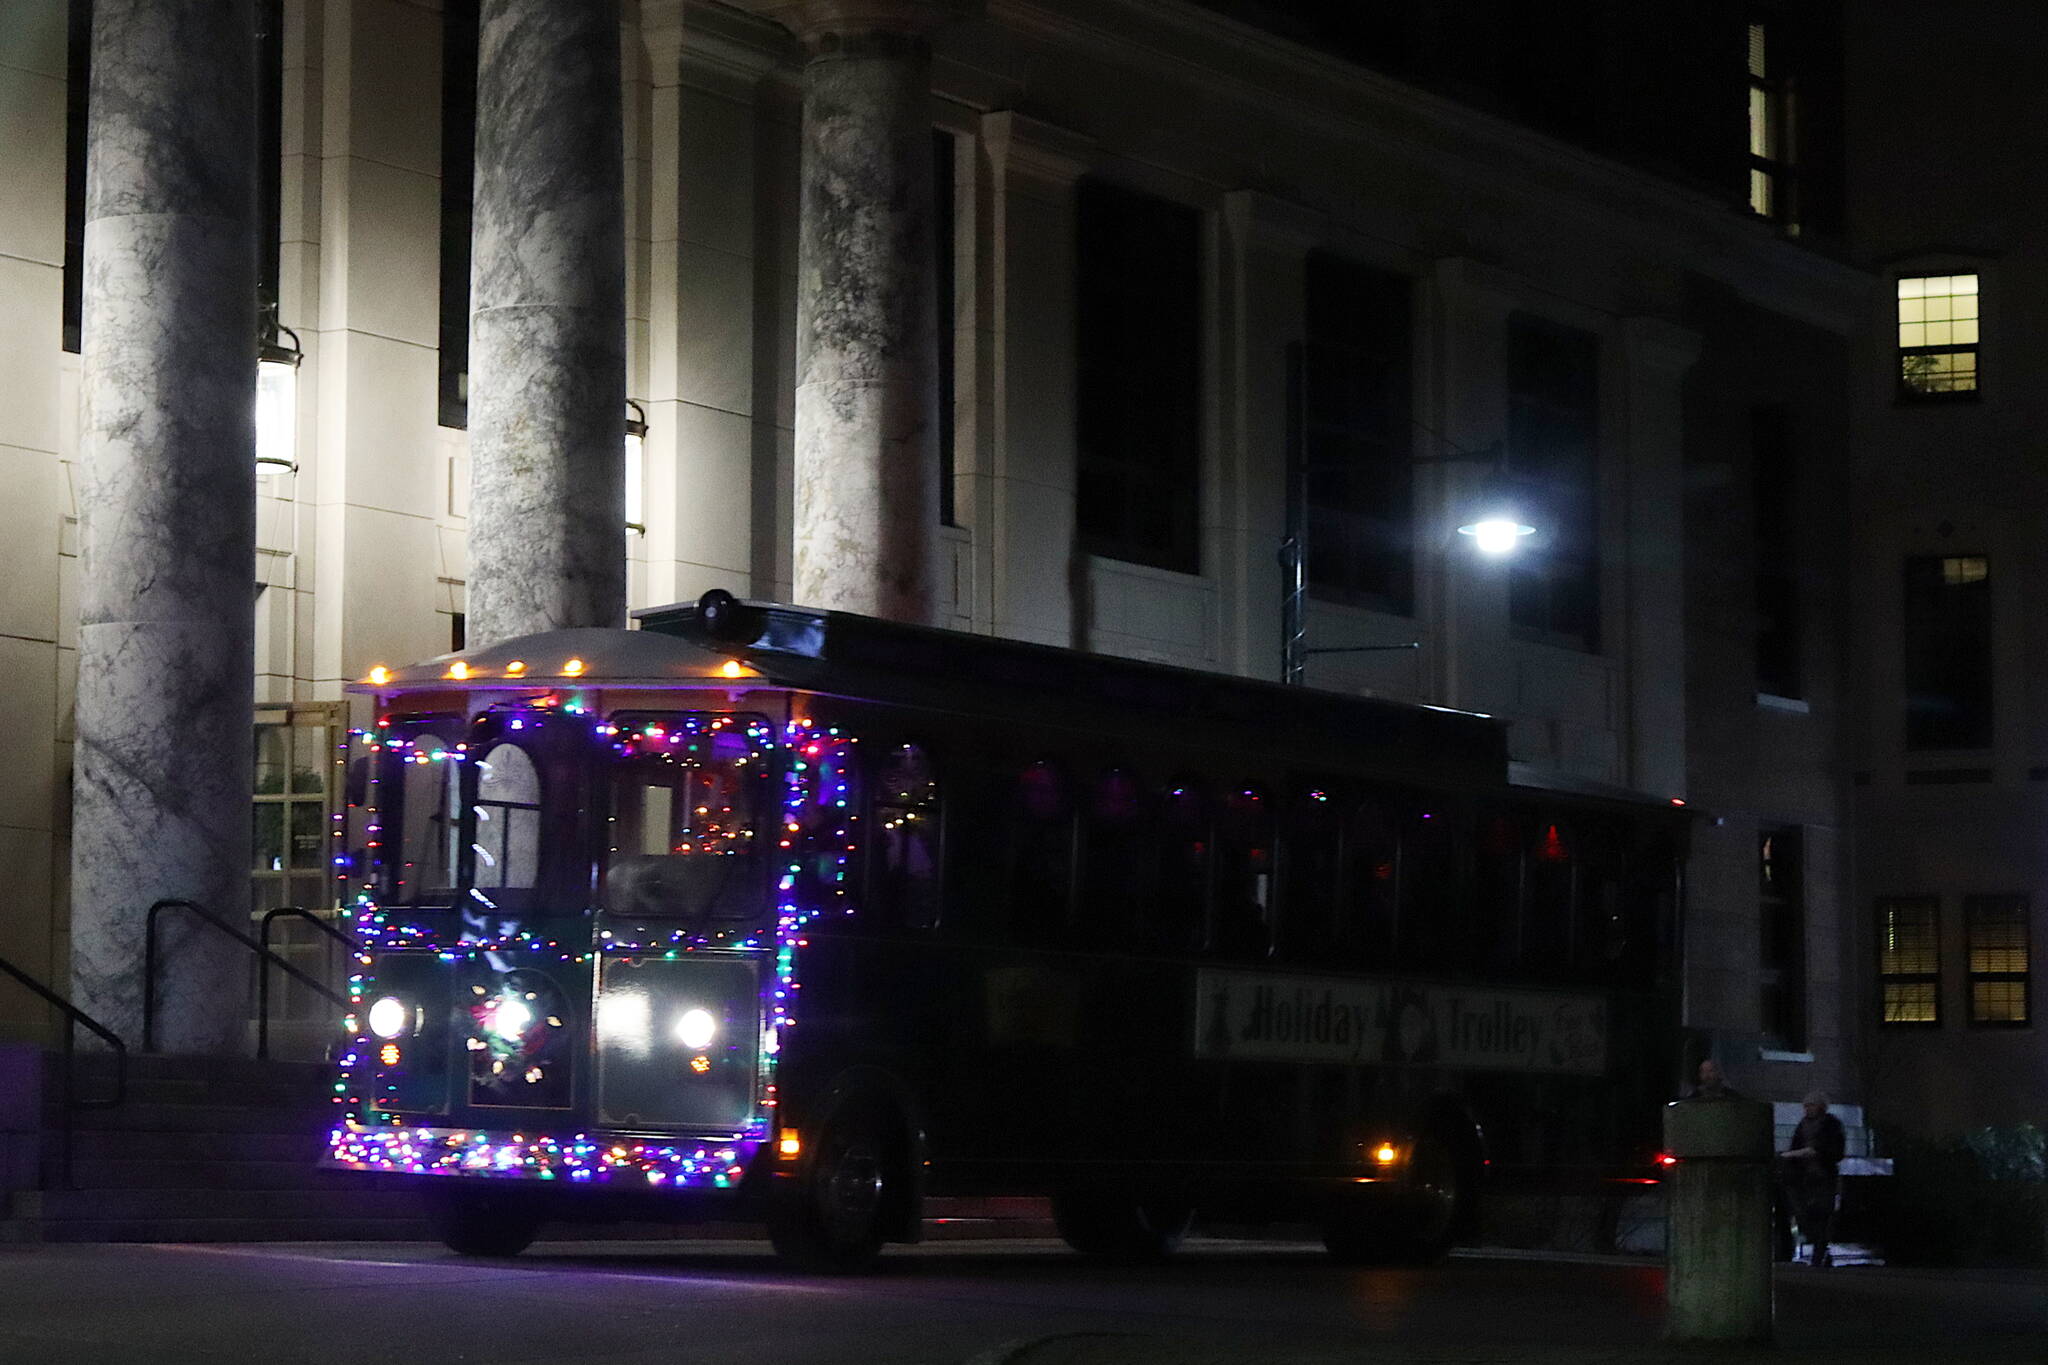 The Holiday Trolley stops at the Alaska State Capitol, a new location on its circuit this year for activities inside the building and the adjacent Juneau-Douglas City Museum, during Gallery Walk on Friday night. (Mark Sabbatini / Juneau Empire)